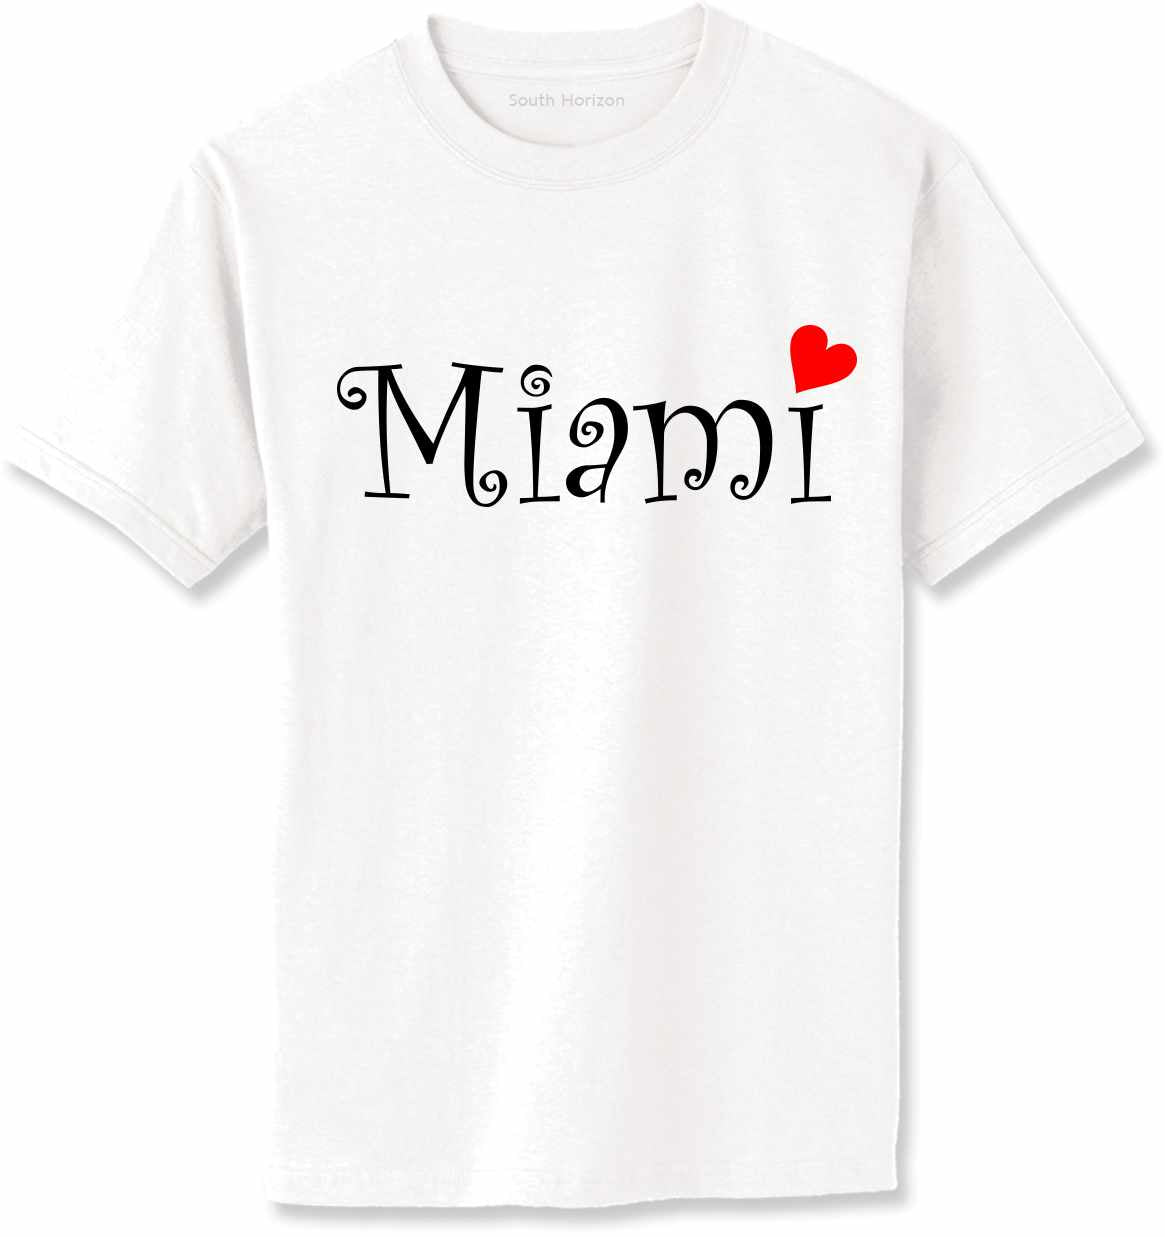 Miami City on Adult T-Shirt (#1331-1)